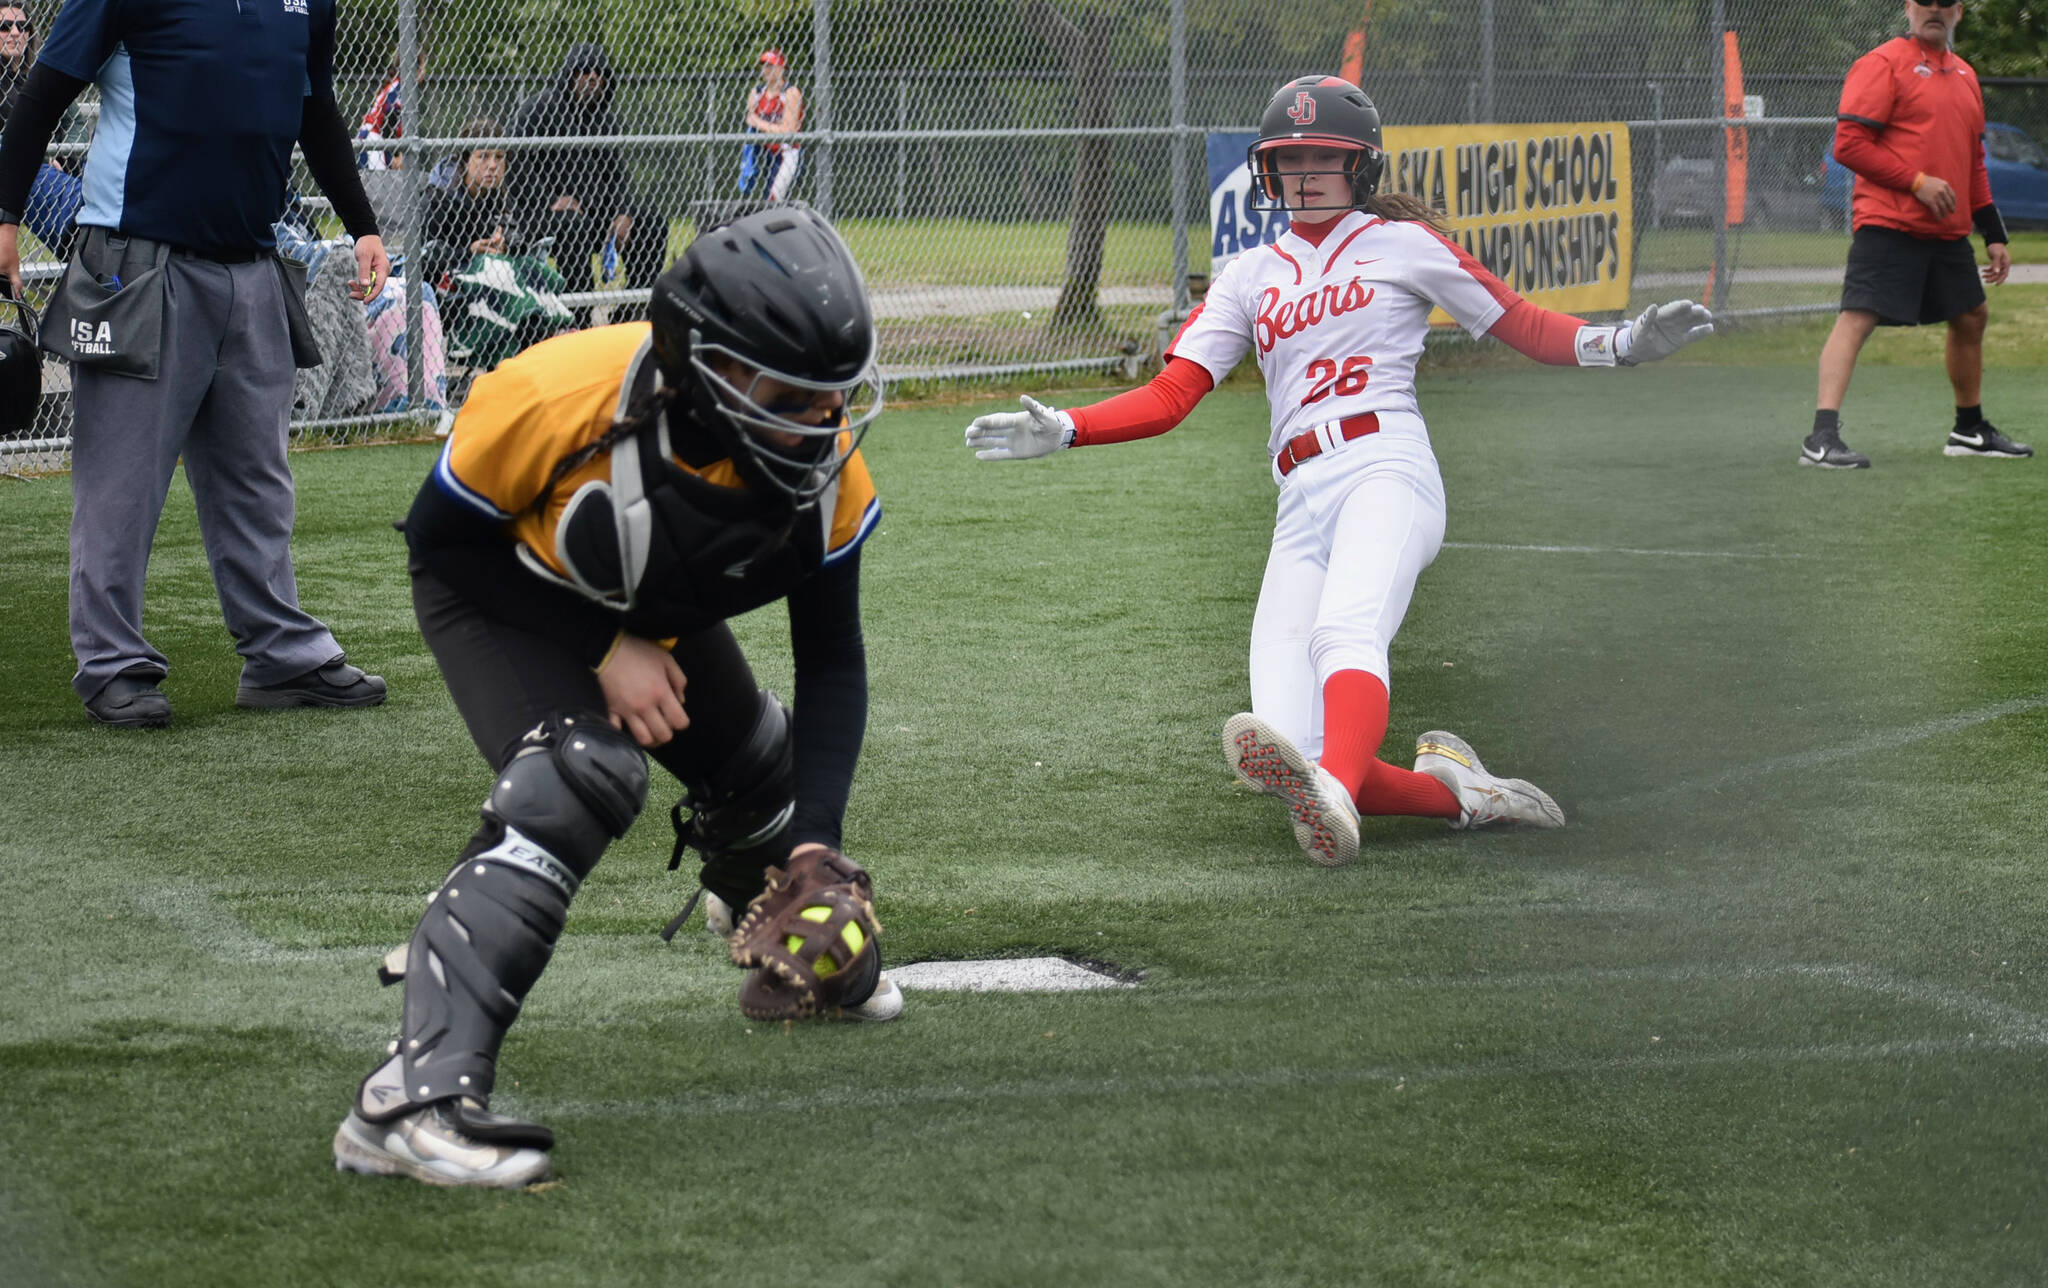 Photo Courtesy JDHS Softball
JDHS freshman Gwen Nizich slides into home plate against Kodiak during the Crimson Bears 9-1 win over the Bears on Thursday in the ASAA Division II State Softball Tournament at Anchorage’s Cartee Fields.